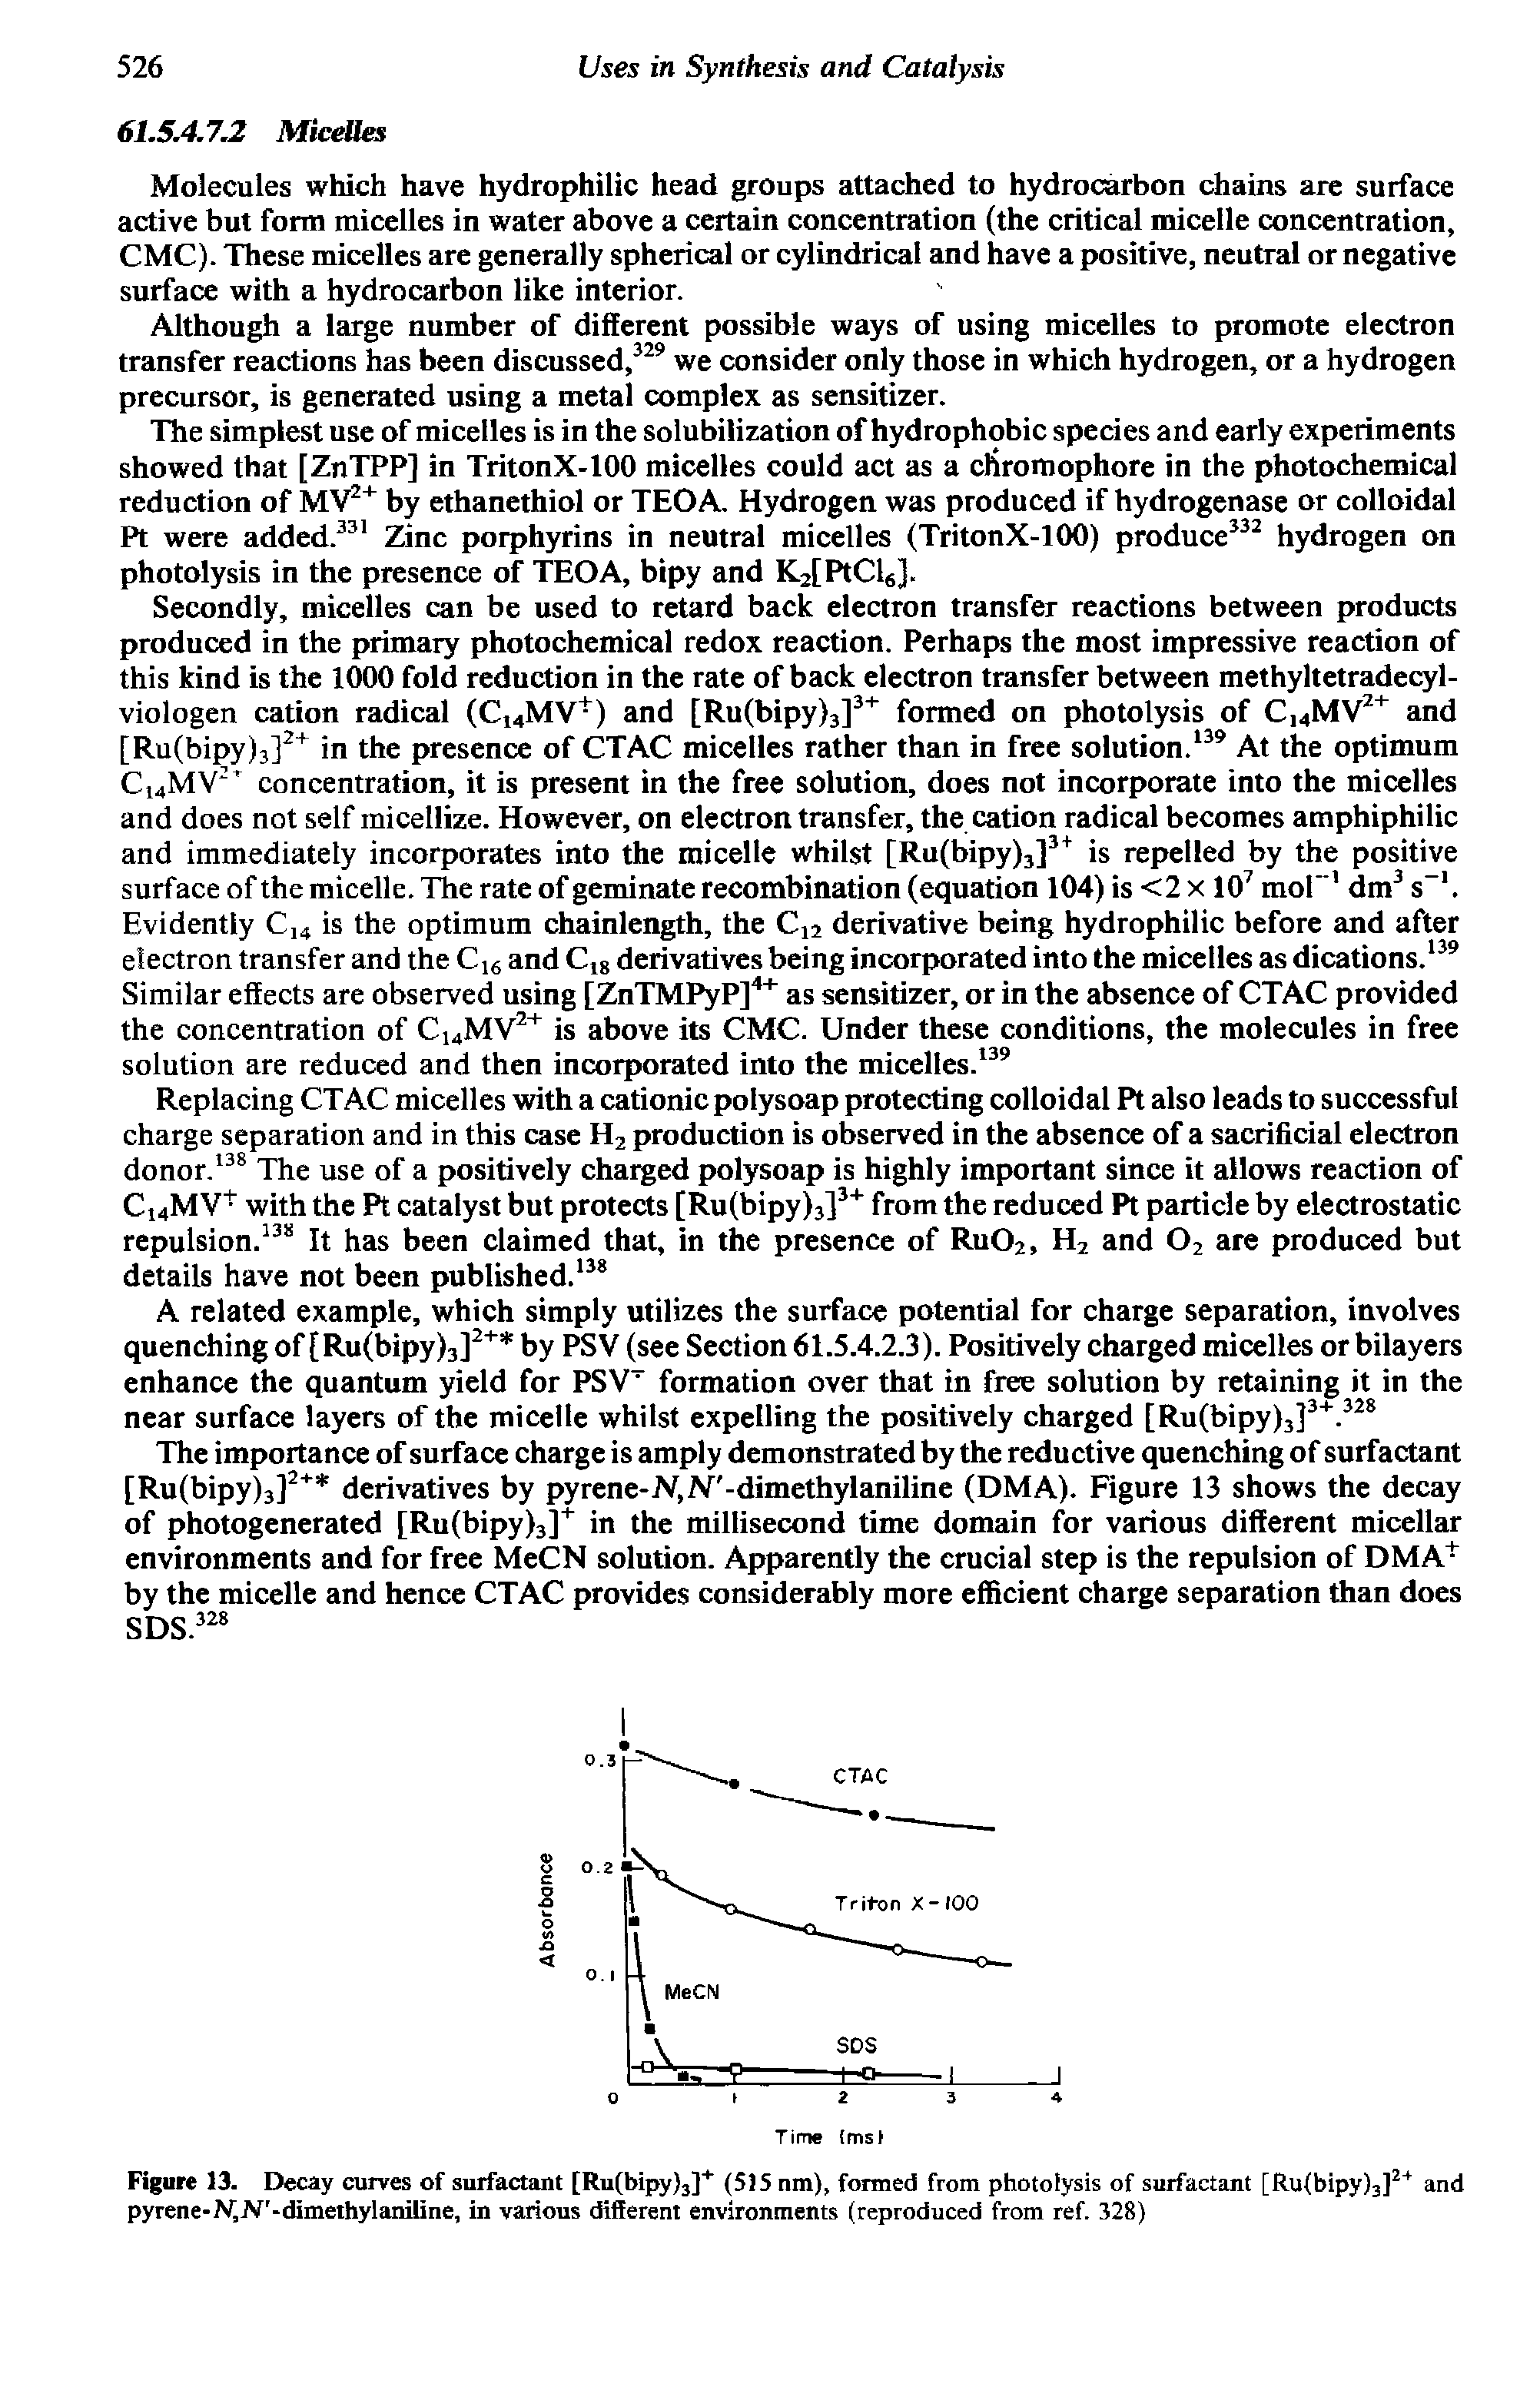 Figure 13. Decay curves of surfactant [Ru(bipy)3]+ (515 nm), formed from photolysis of surfactant [Ru(bipy)3]2+ and pyrene-N,iV-dimethylaniline, in various different environments (reproduced from ref. 328)...